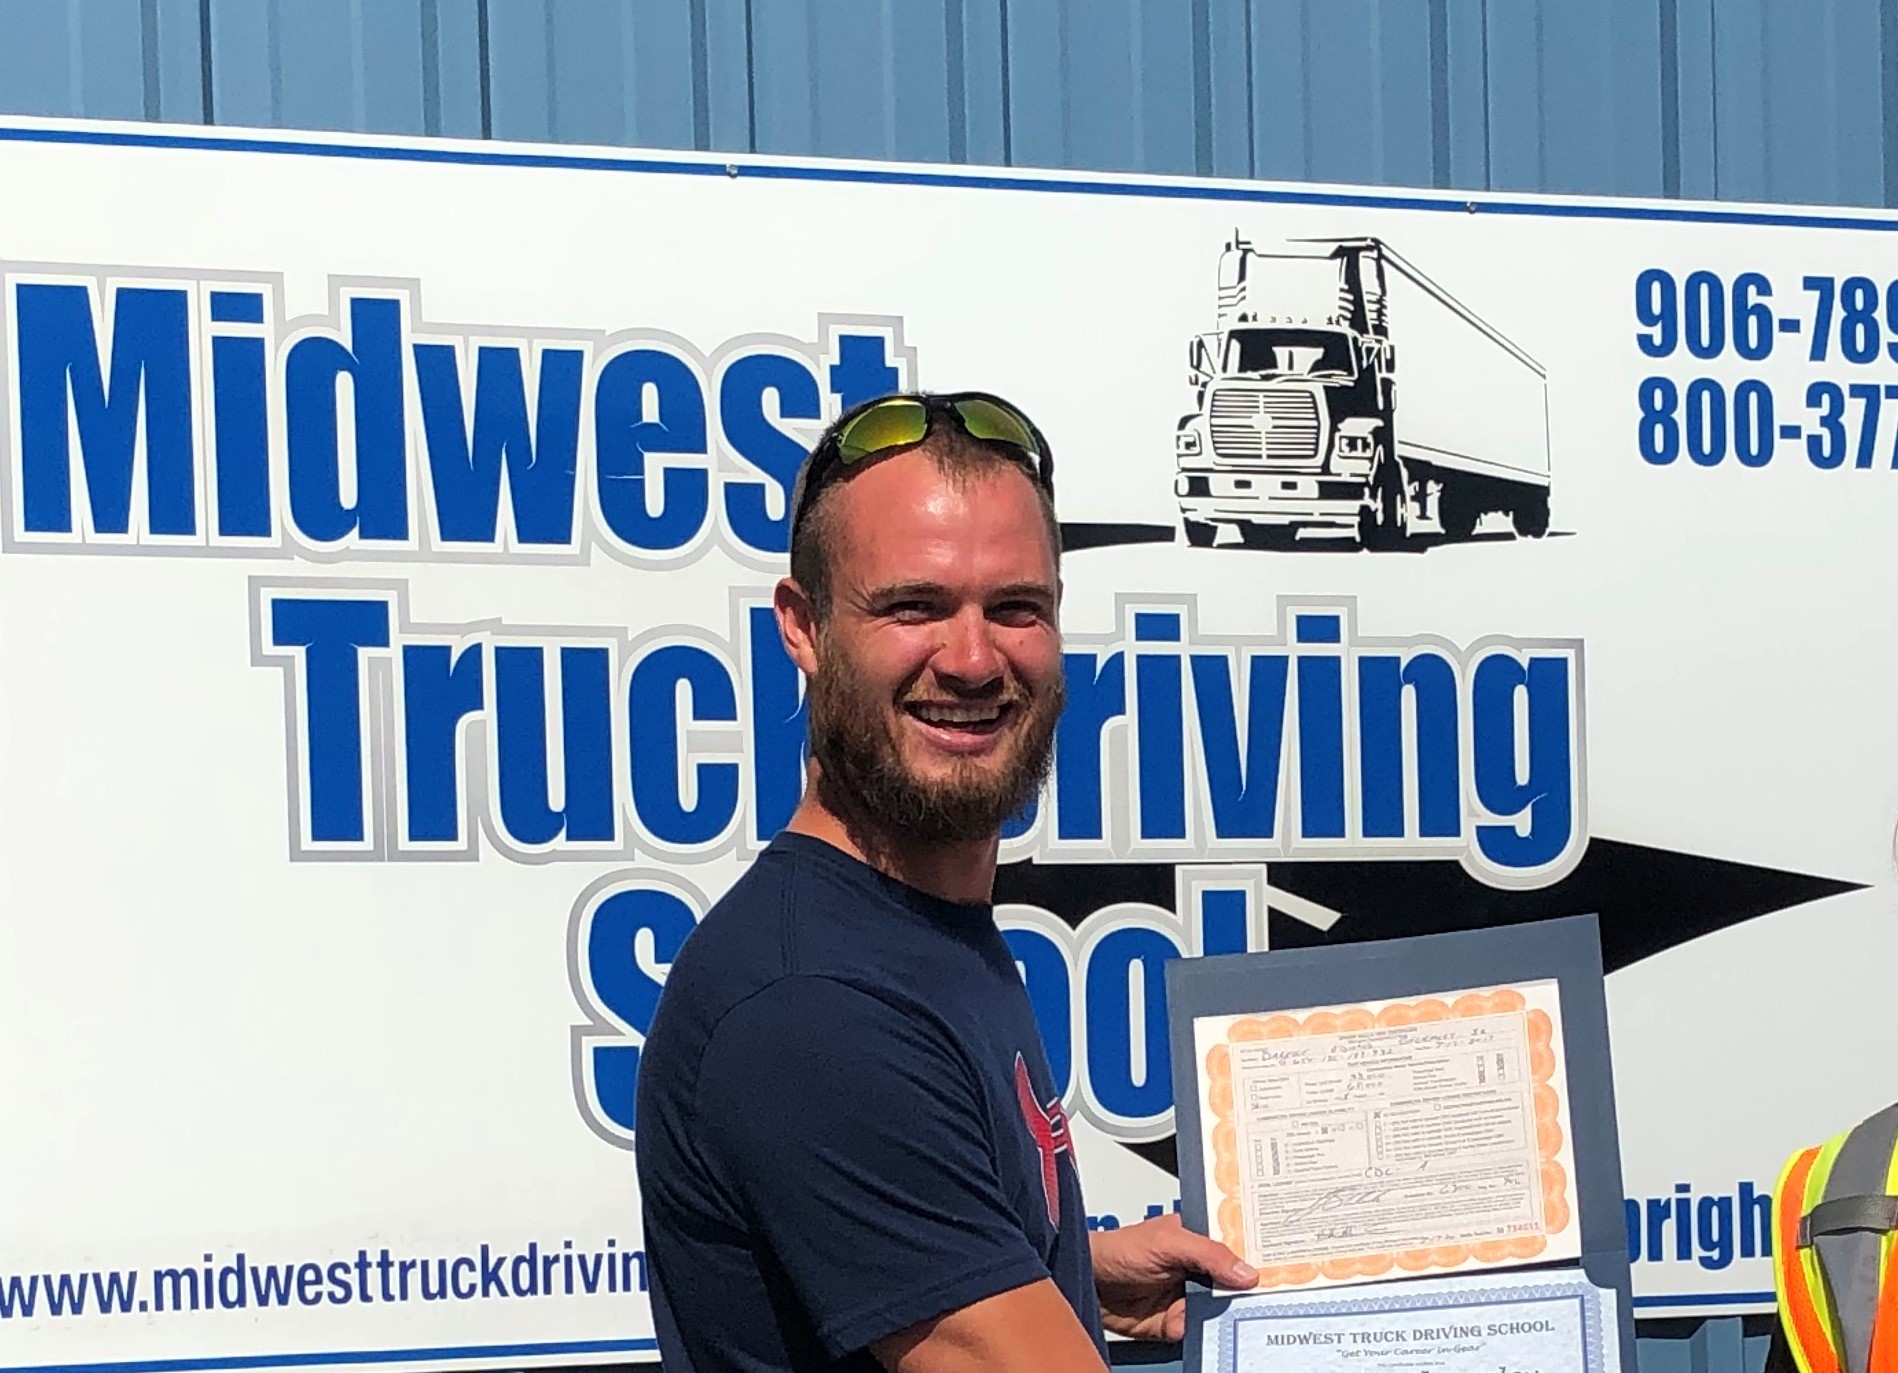 Darelle poses in front of a Midwest Truck Driving Sign with his certificate.